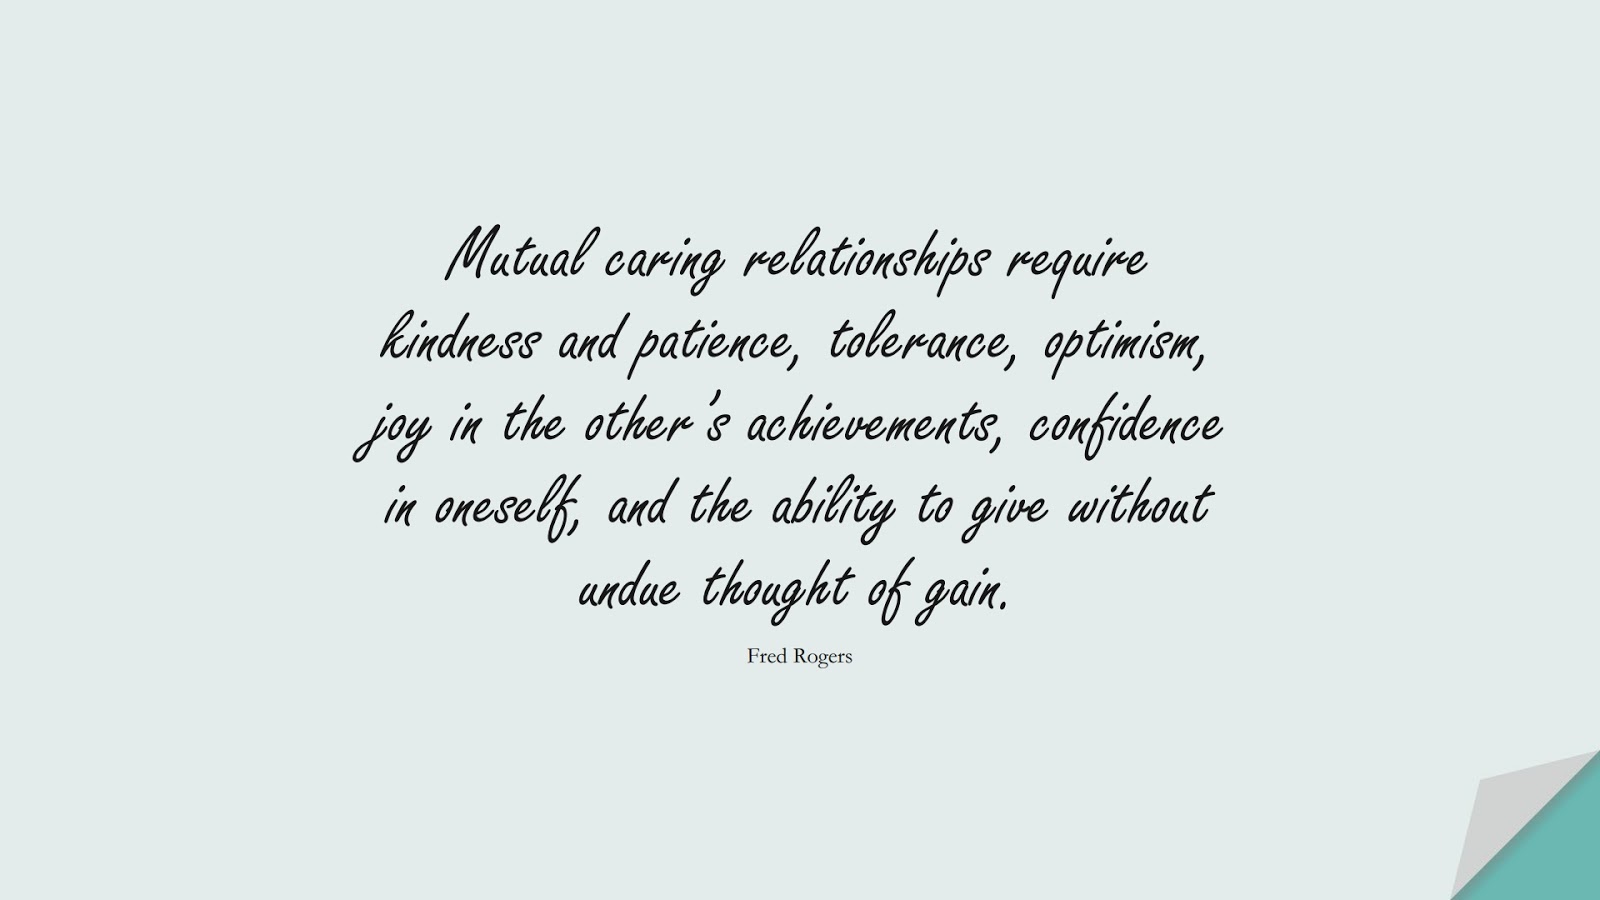 Mutual caring relationships require kindness and patience, tolerance, optimism, joy in the other’s achievements, confidence in oneself, and the ability to give without undue thought of gain. (Fred Rogers);  #RelationshipQuotes